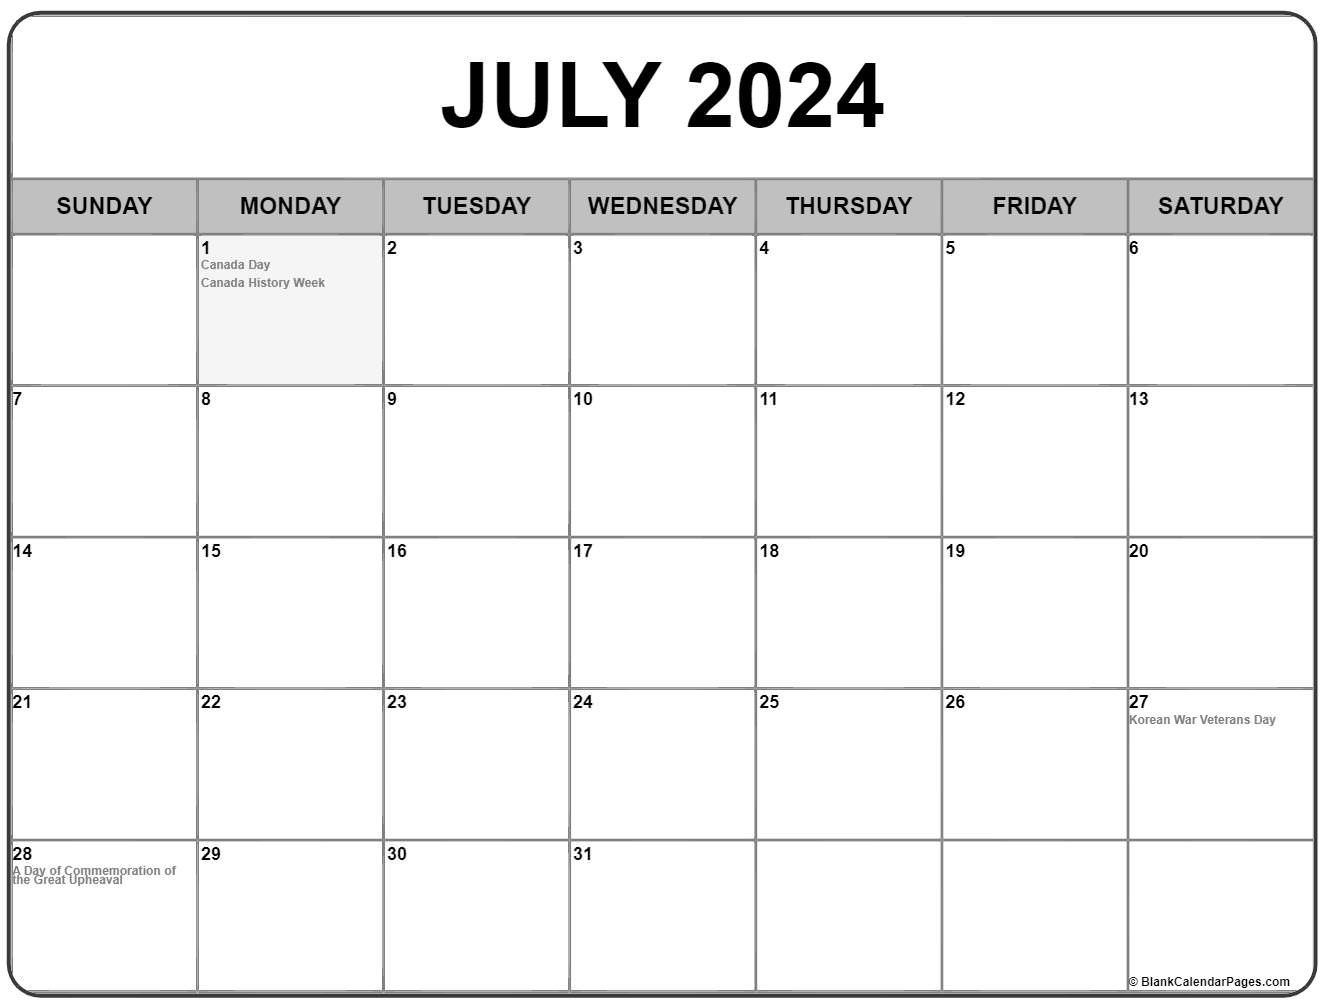 Collection of July 2021 calendars with holidays